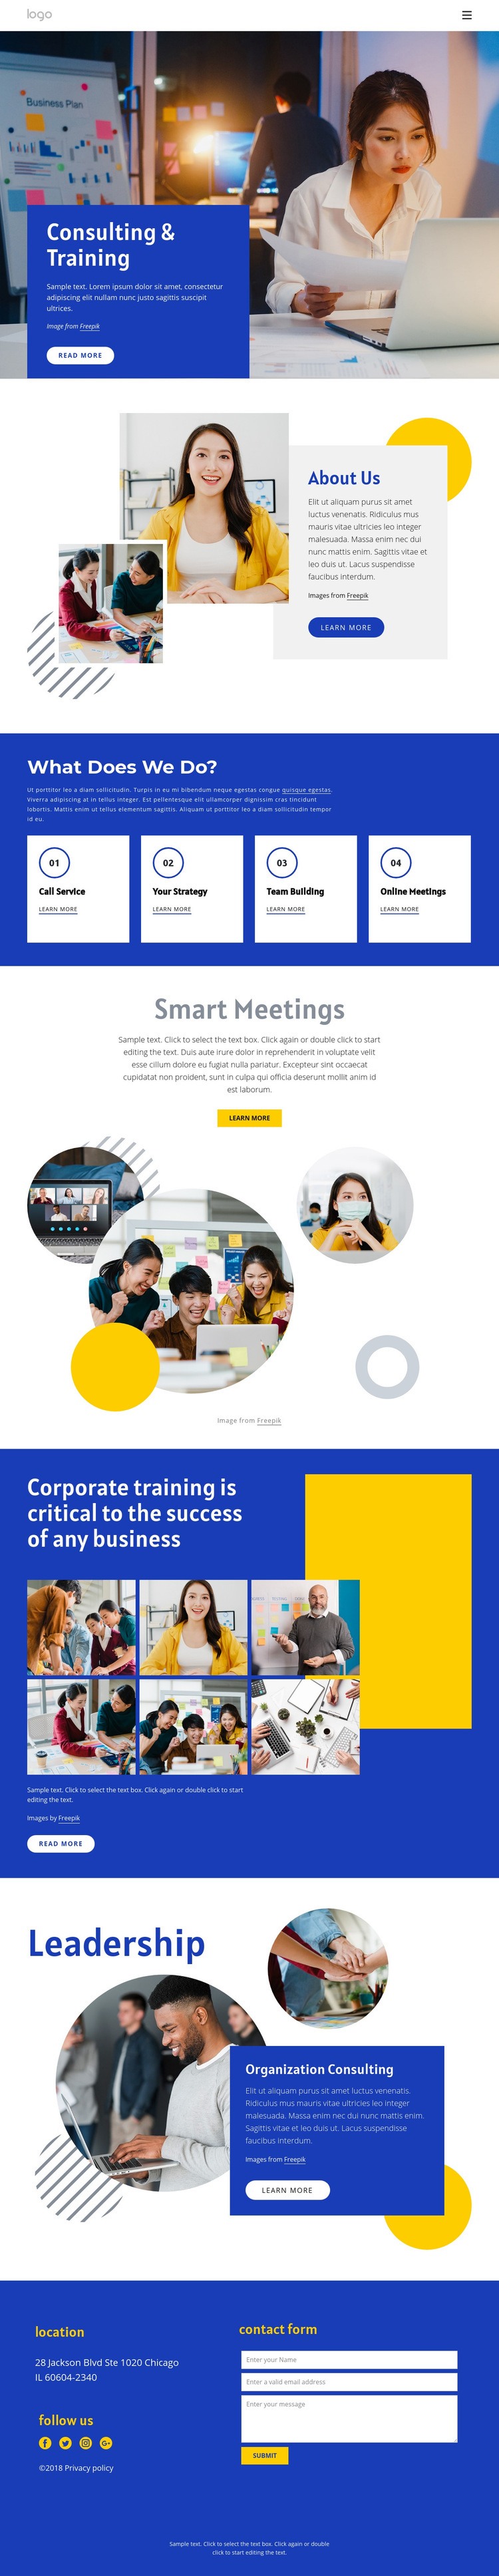 Consulting and training Web Page Design